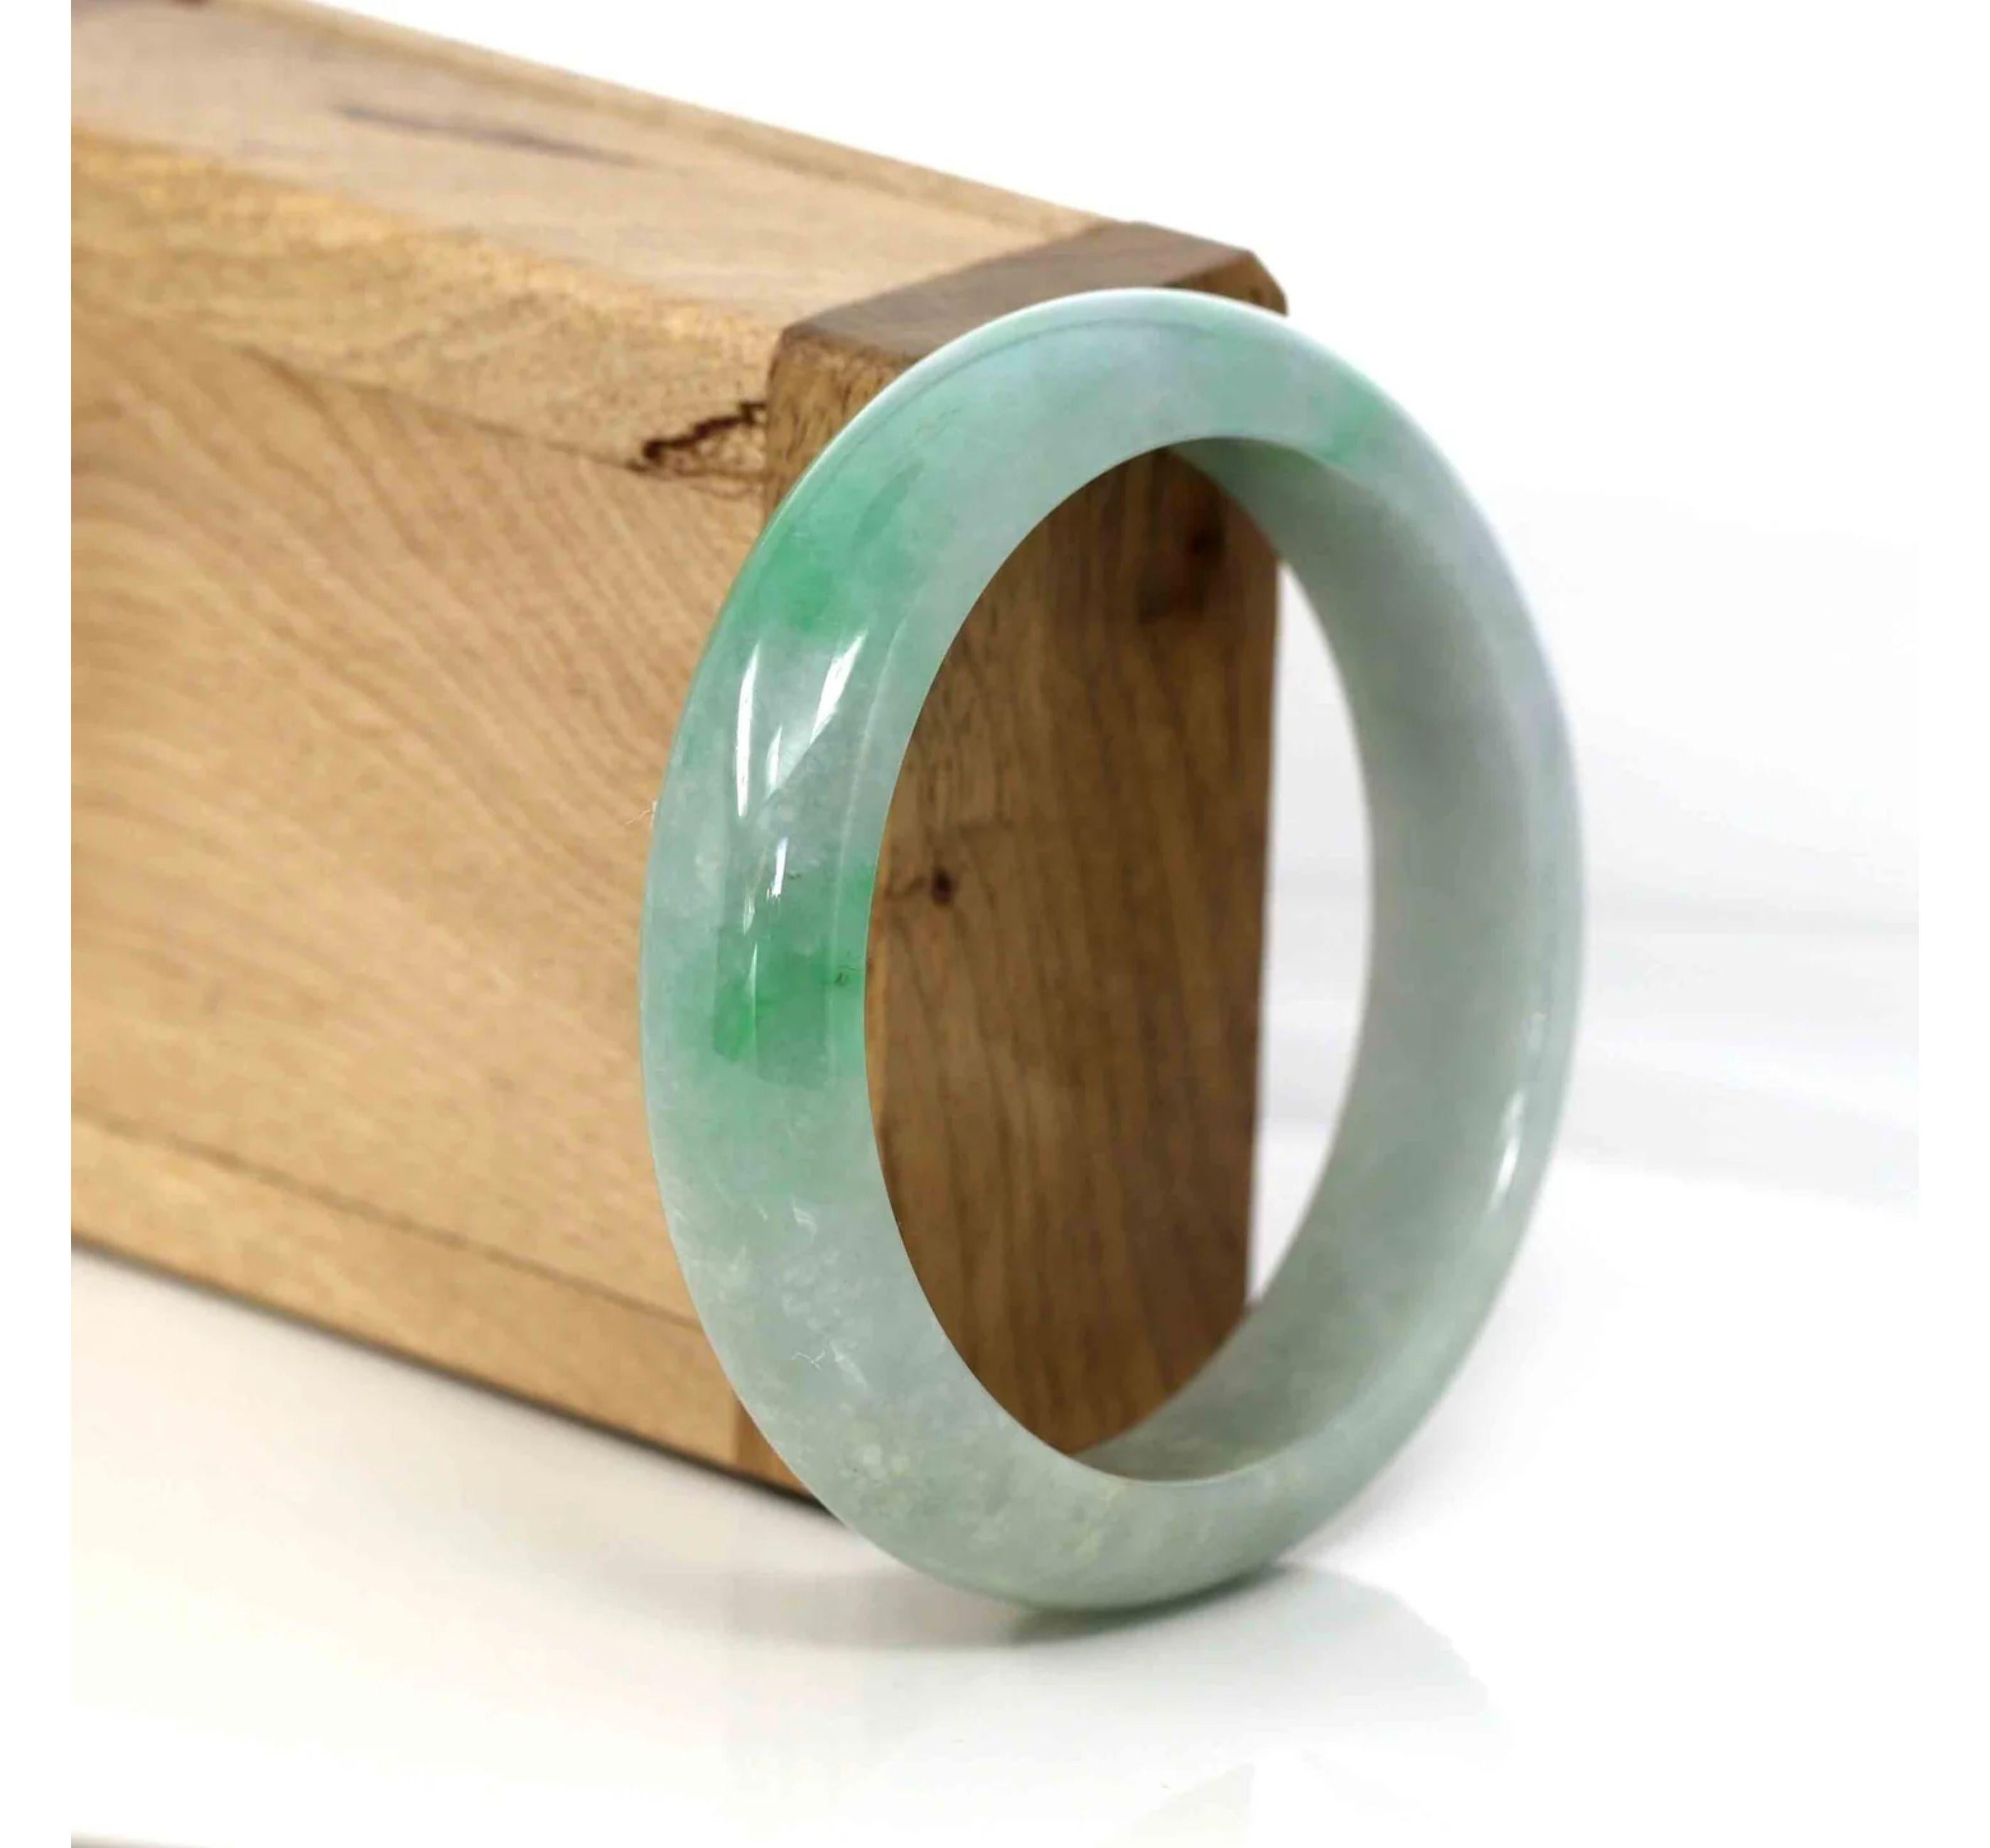 * DETAILS---This bangle is made with genuine Burmese Jadeite jade, The jade texture is smooth with green color inside. The green color looks gorgeous. Just has some natural clouds. It's a very unique bangle. You know the genuine jade bangle is